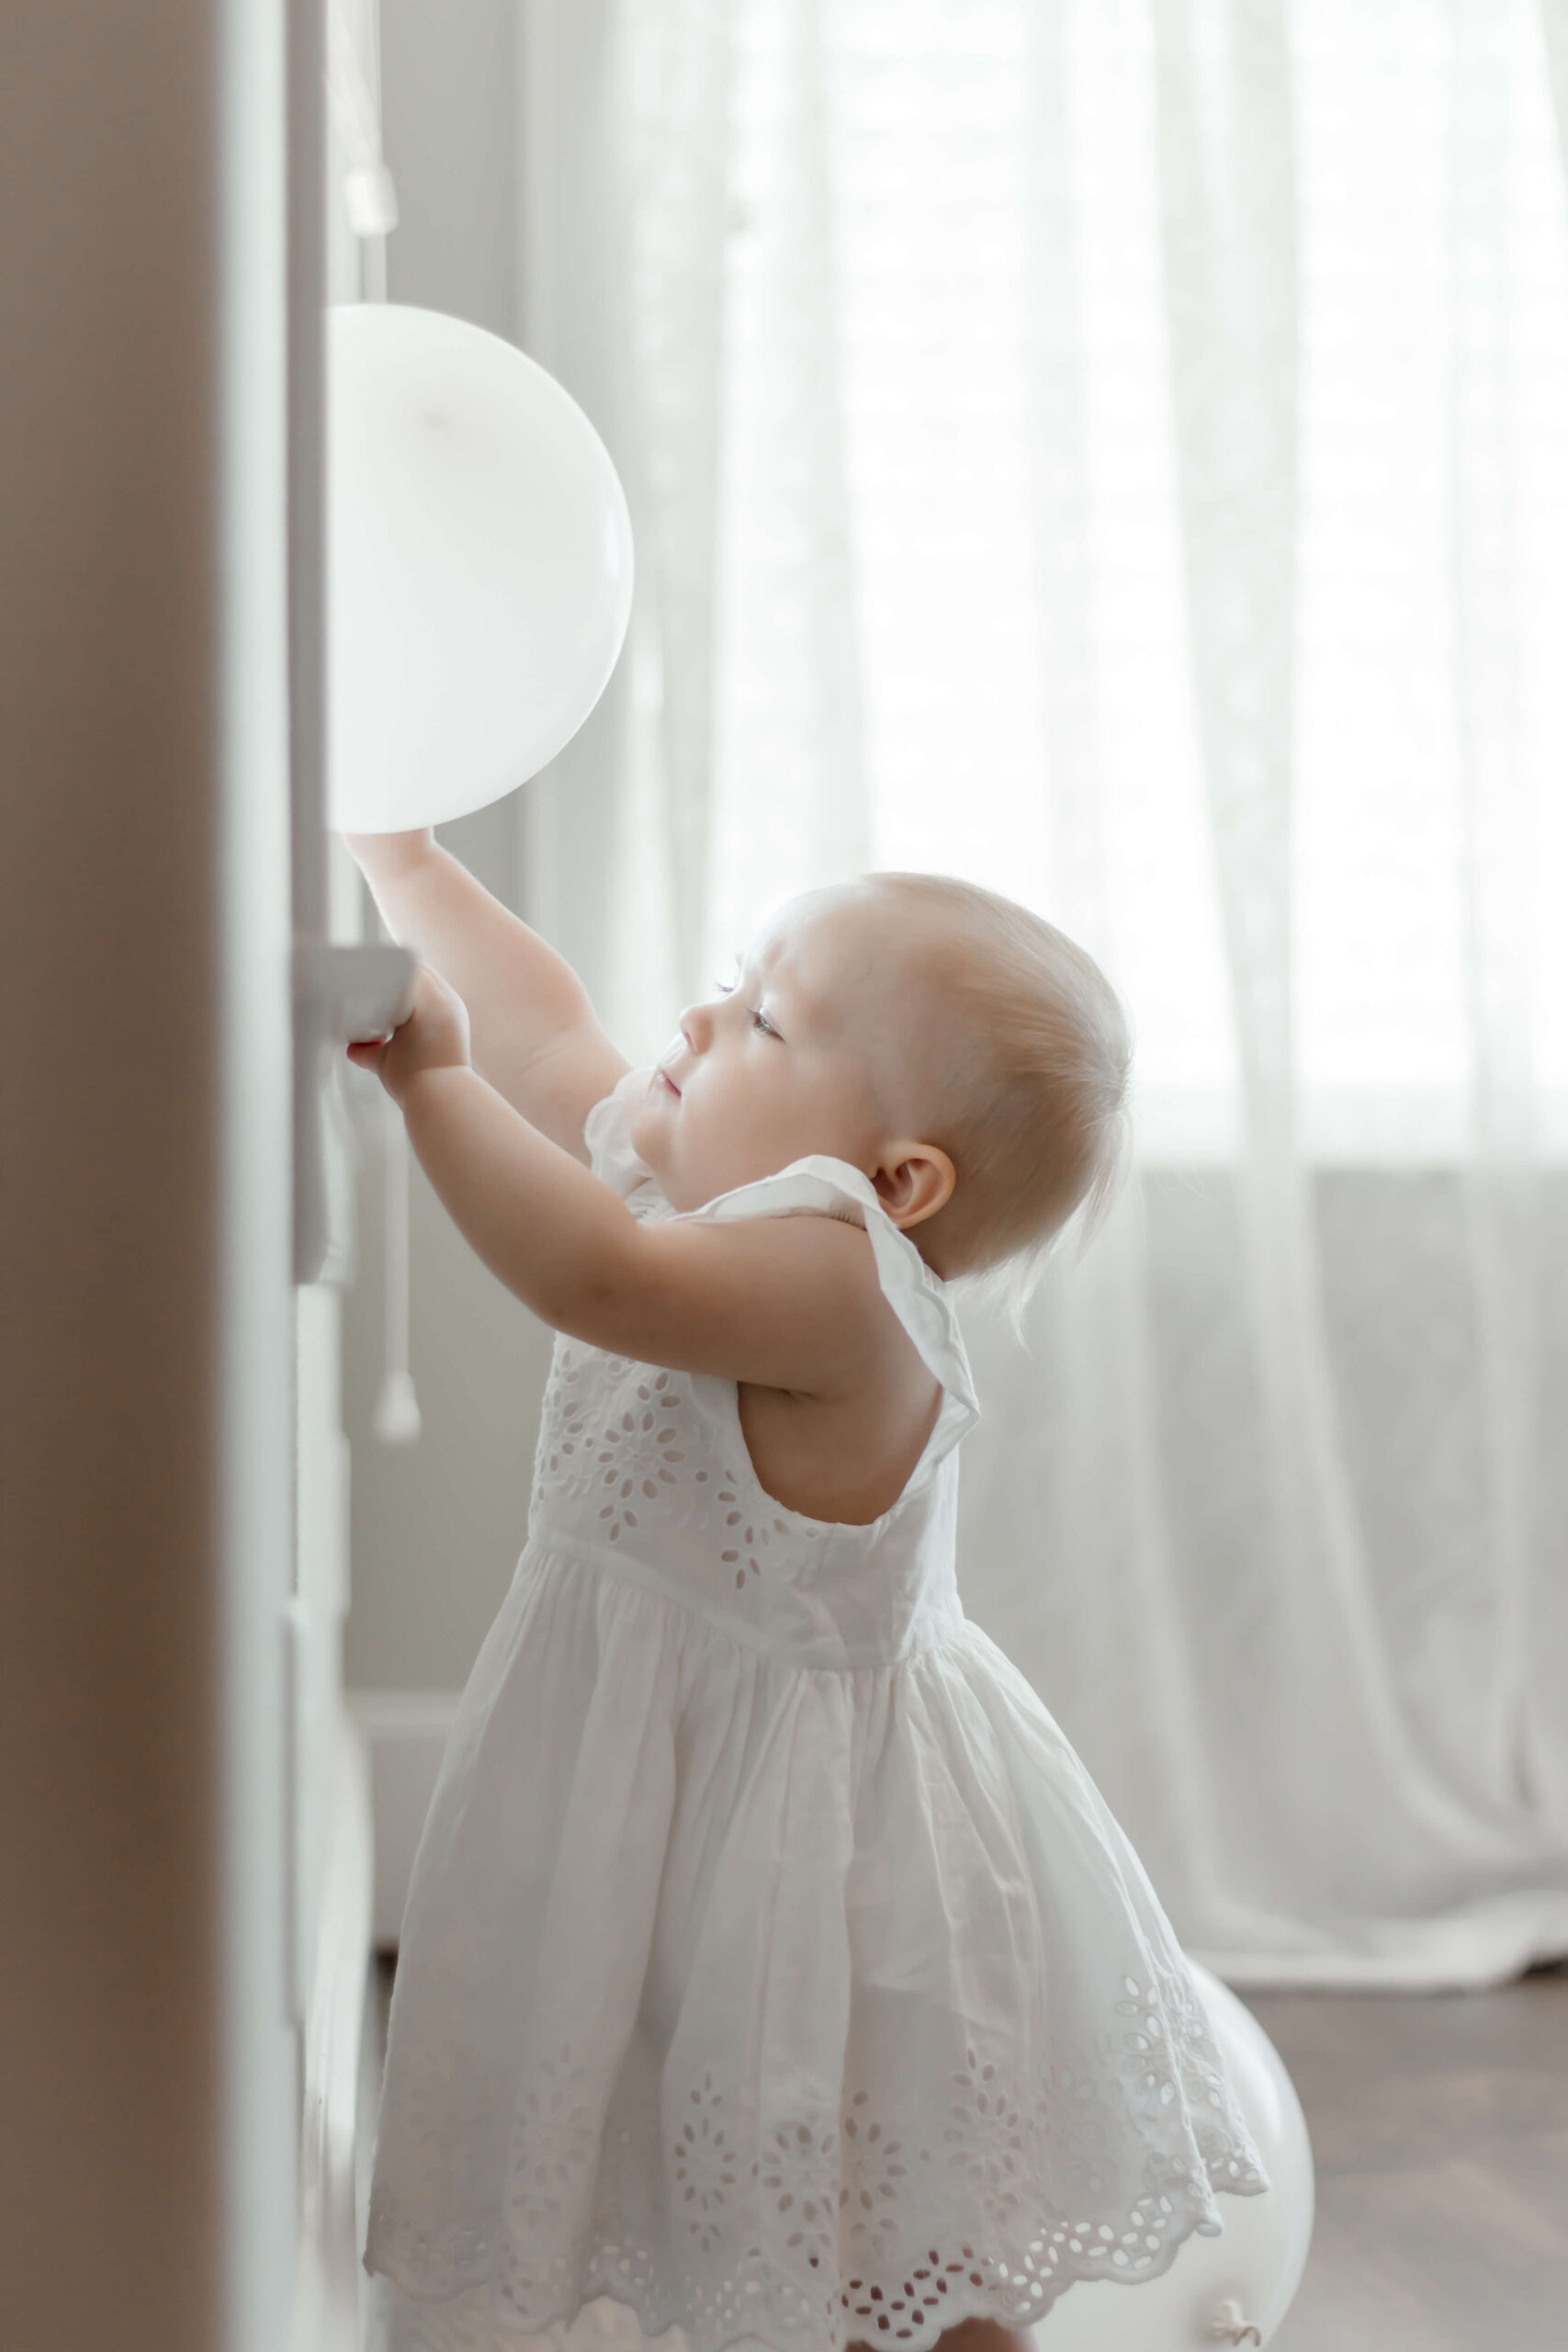 Postpartum therapy Houston is a resource that moms really need to know about. Baby girl celebrates her first birthday with a cake smash at home, wearing a white dress and playing with a white balloon in the windowsill.